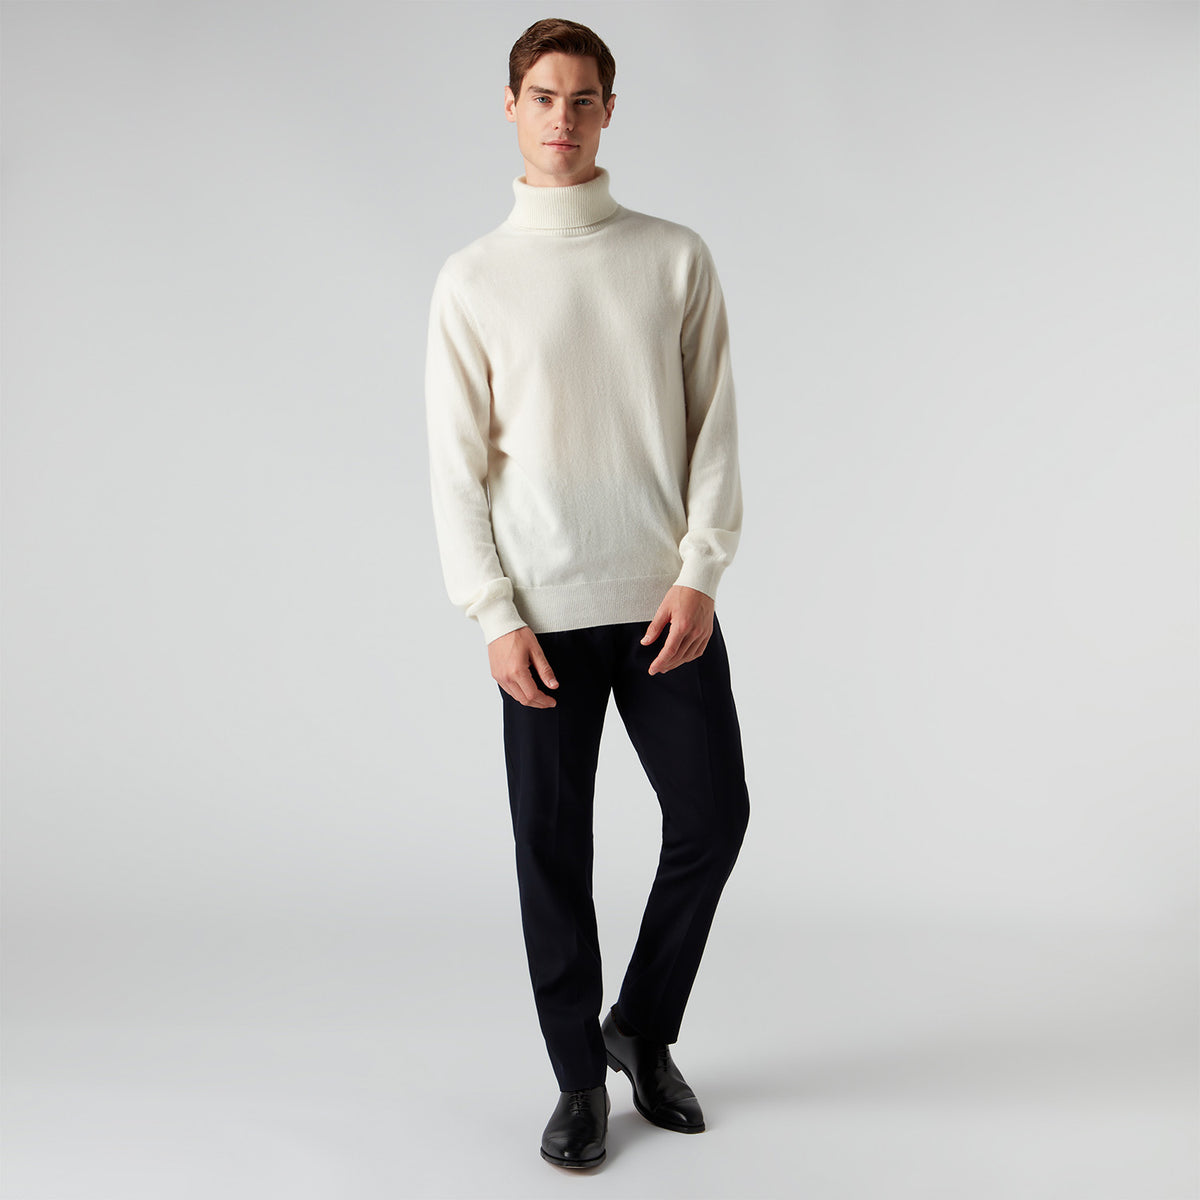 James Bond Cashmere Roll Neck Sweater - Moonraker Edition - By N. Peal